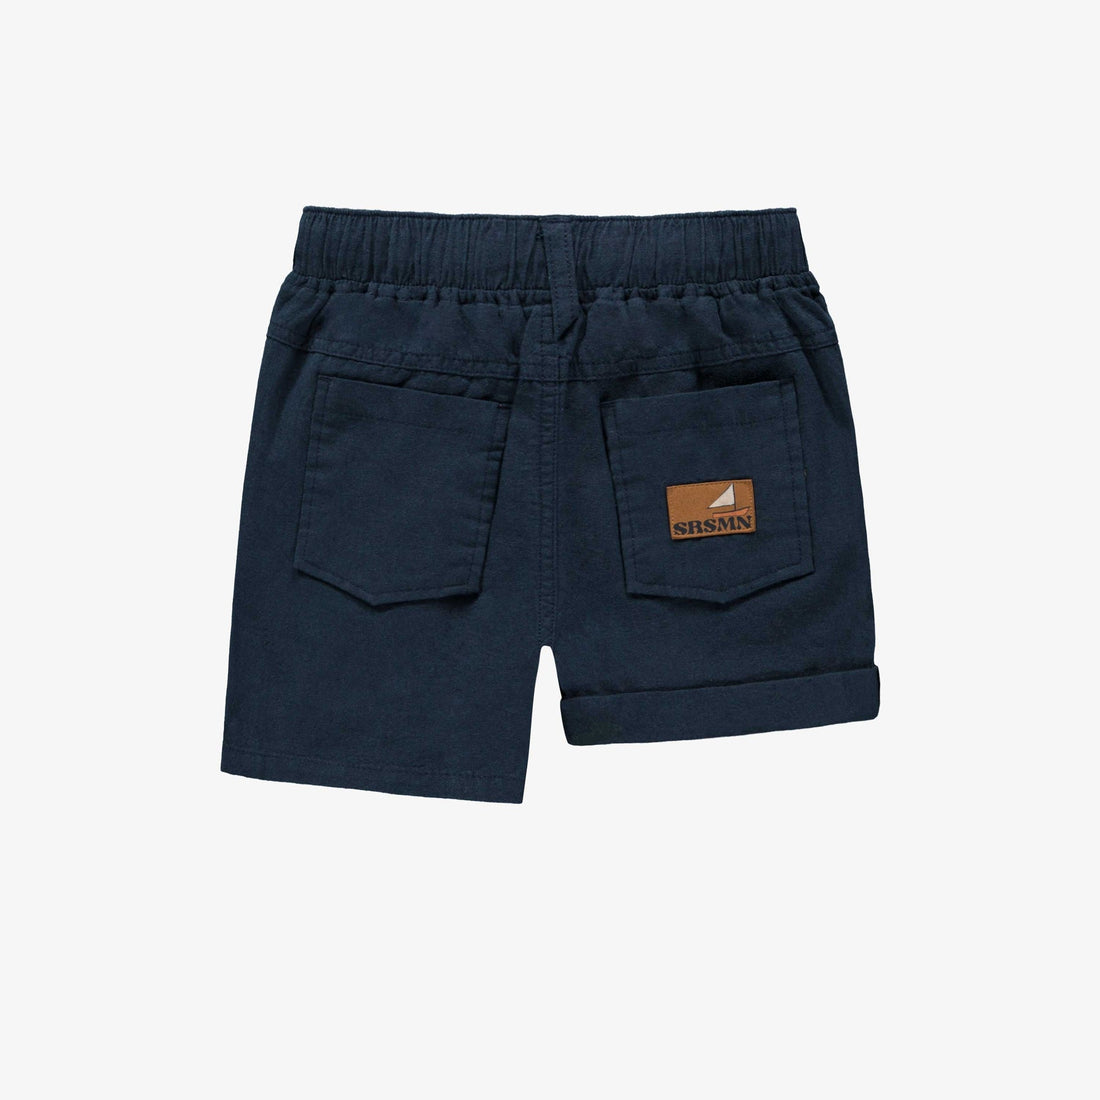 NAVY RELAXED FIT BERMUDAS IN COTTON AND LINEN, CHILD